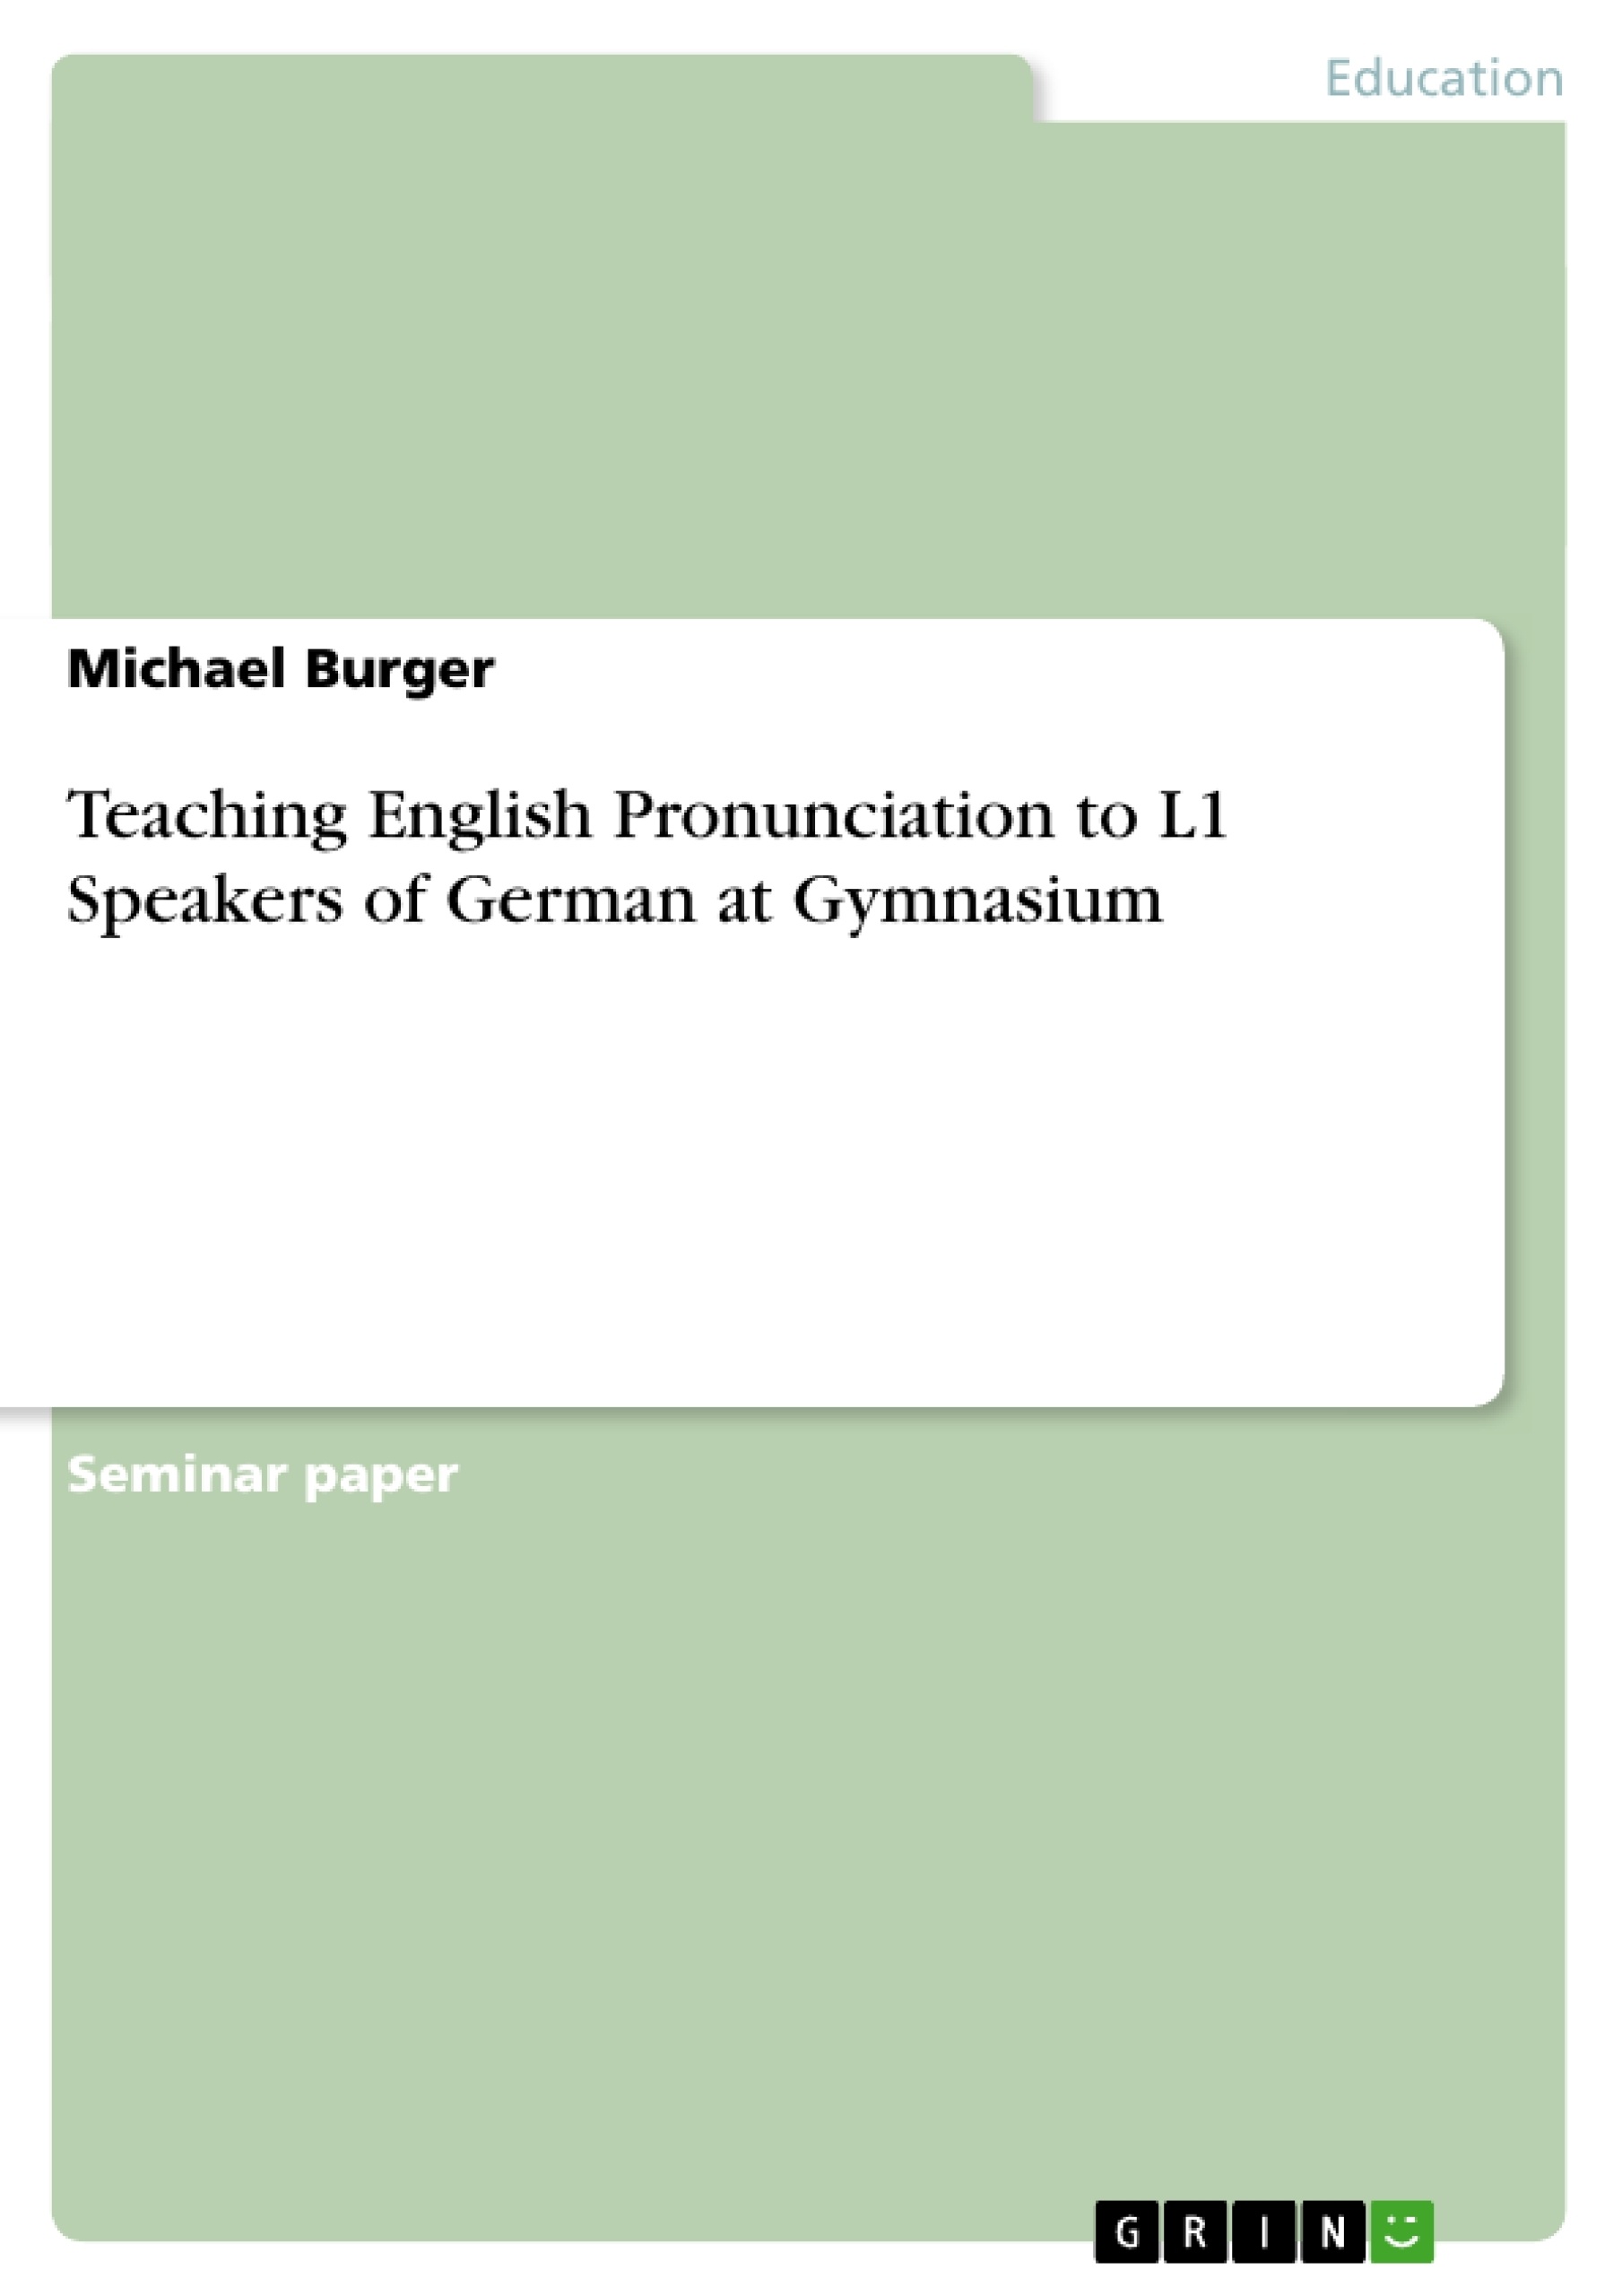 Title: Teaching English Pronunciation to L1 Speakers of German at Gymnasium